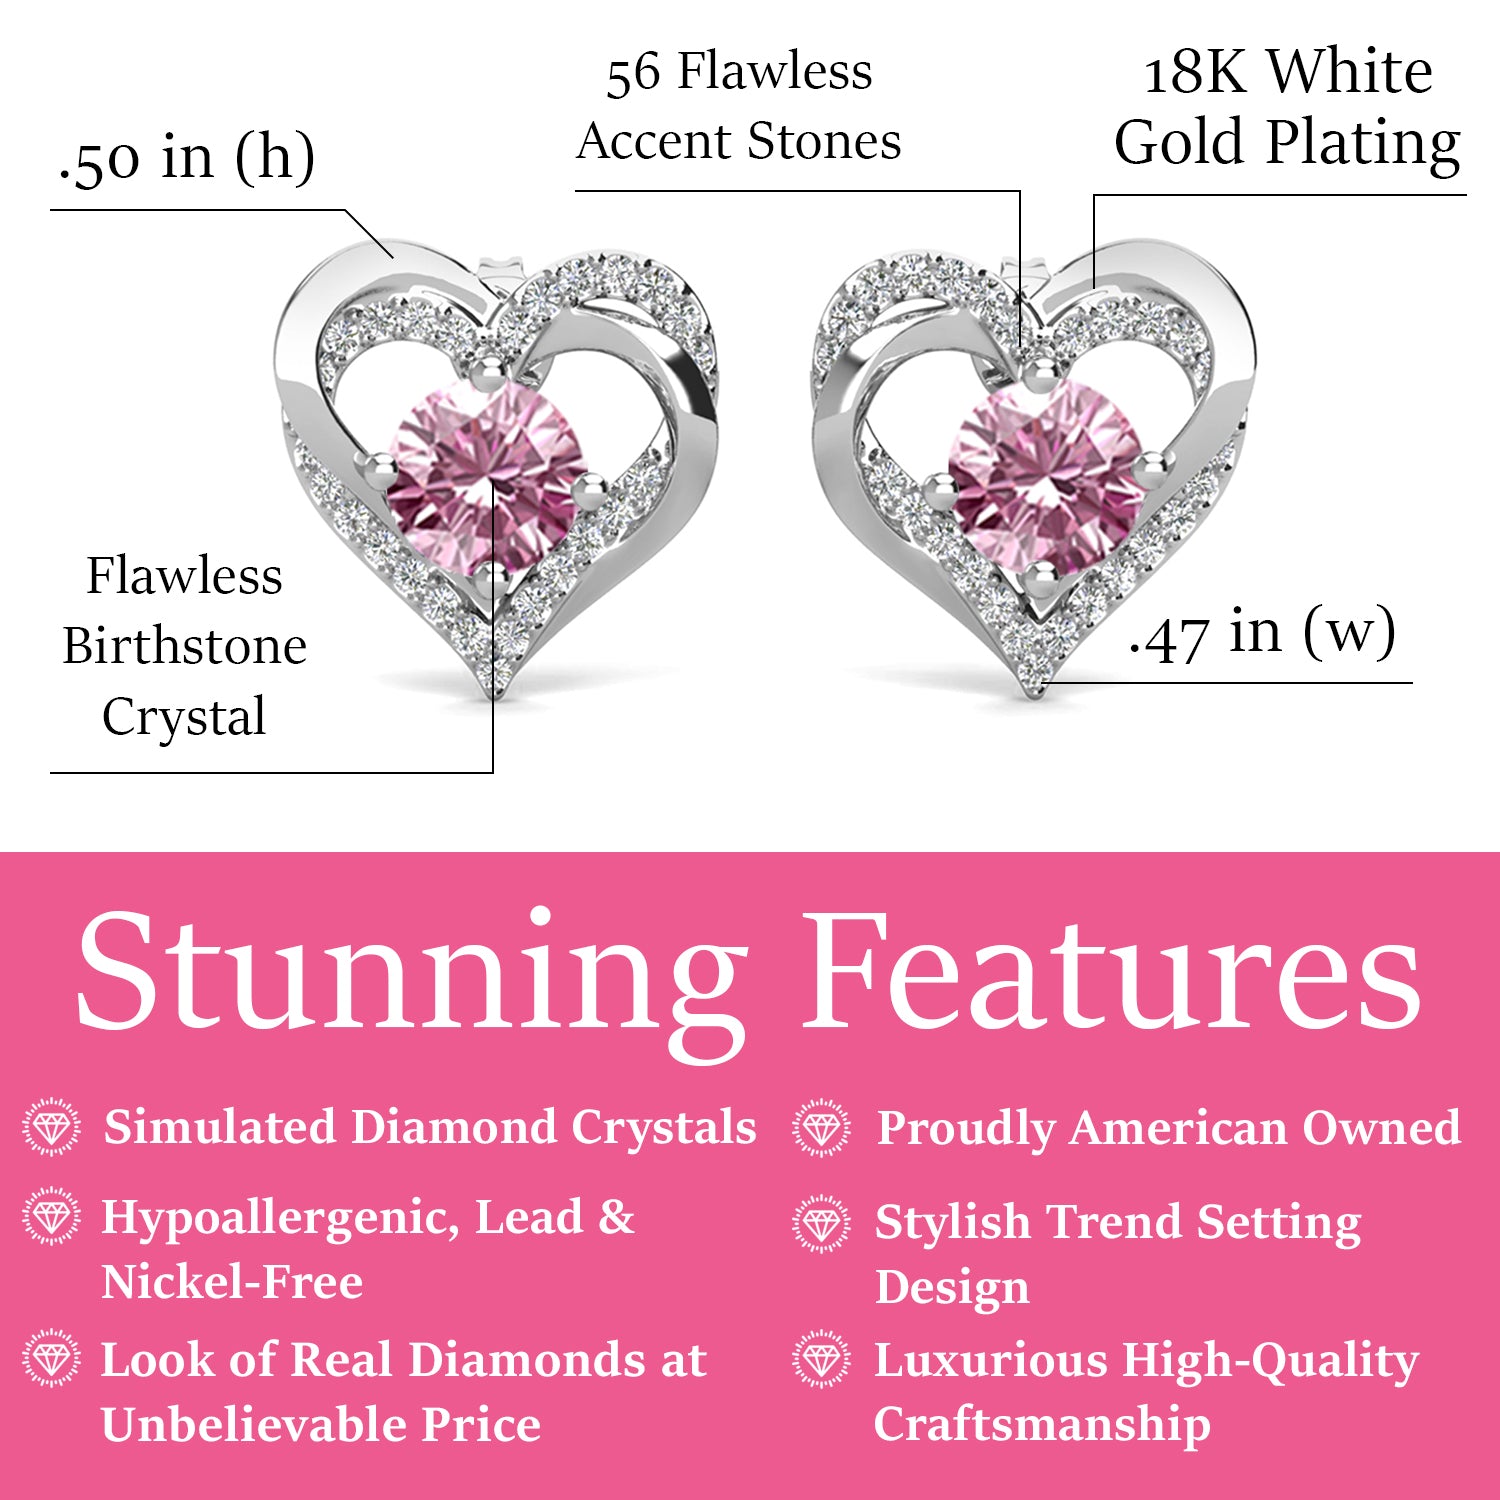 Forever October Birthstone Pink Tourmaline Earrings, 18k White Gold Plated Silver Double Heart Crystal Earrings